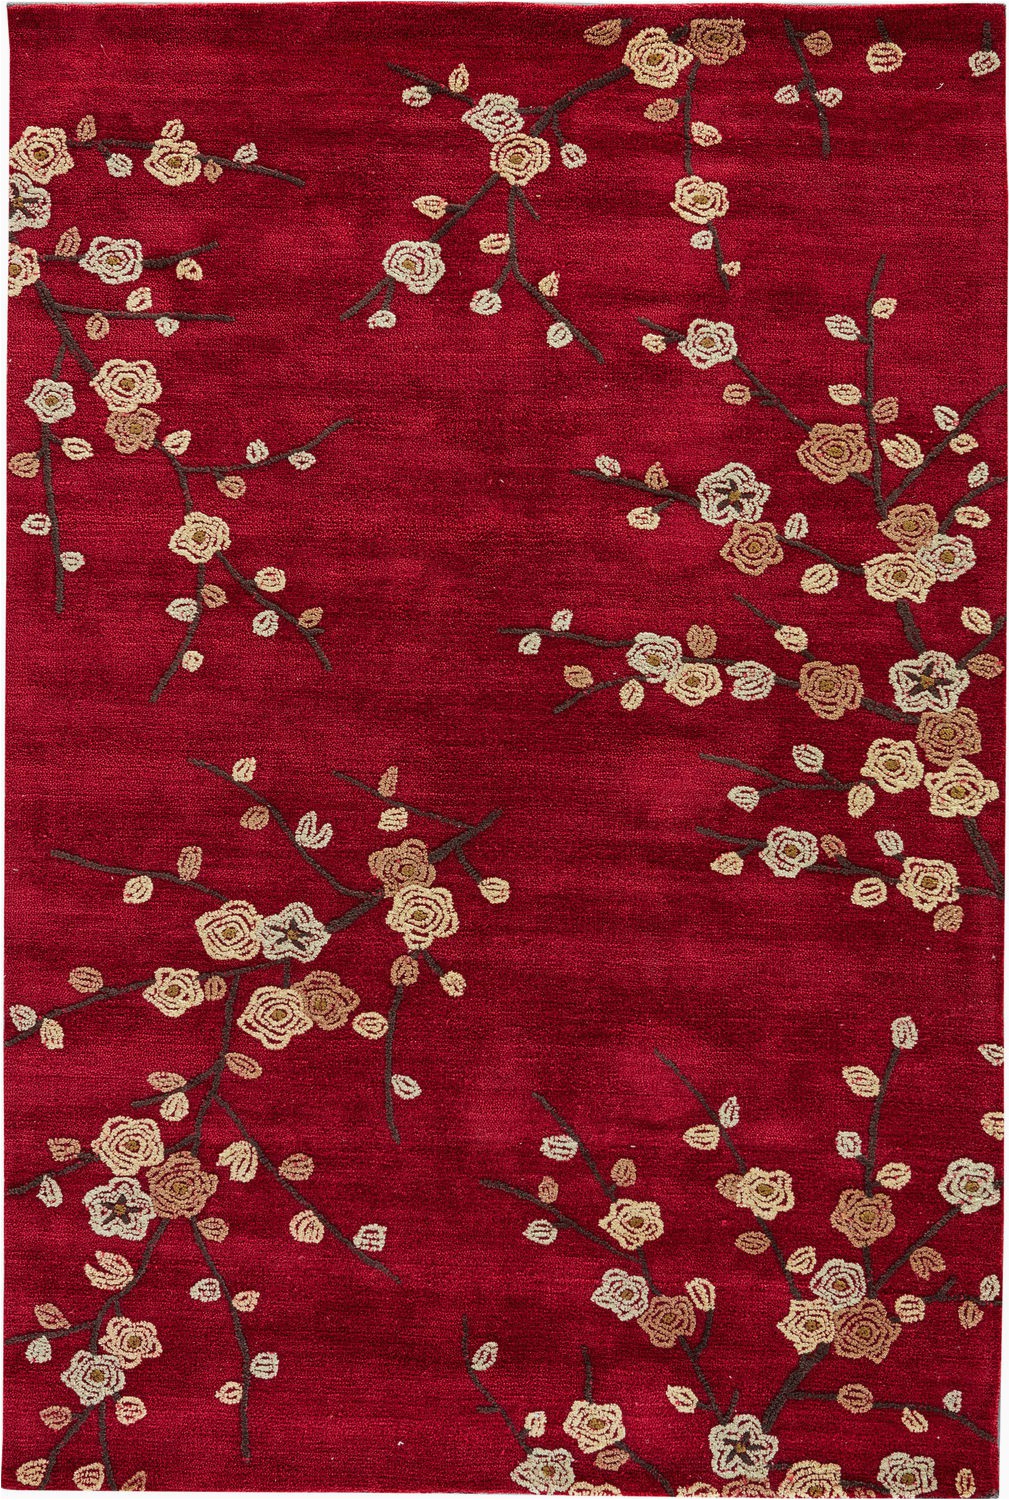 Cherry Red Bathroom Rugs Jaipur Rugs Brio Cherry Blossom Red Rug From the assorted